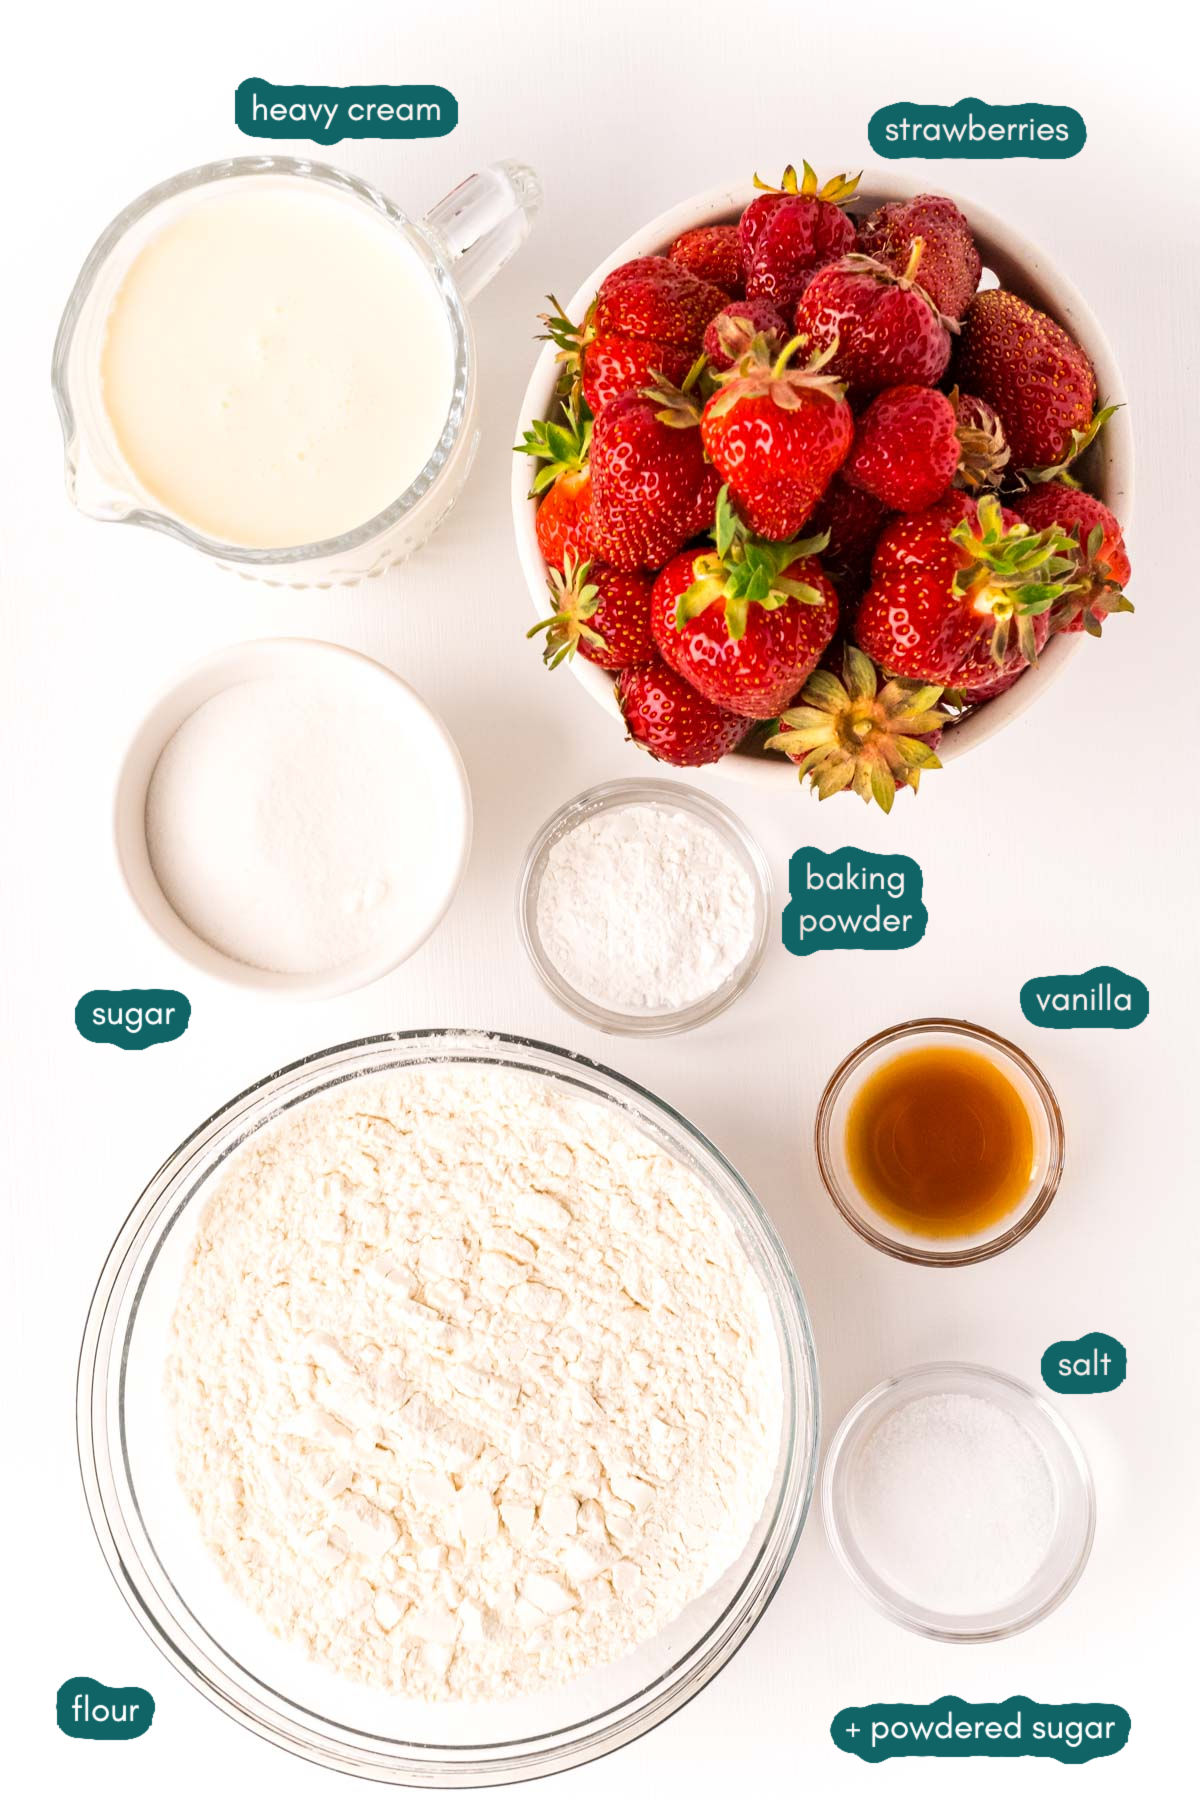 Overhead photo of ingredients to make strawberry shortcake prepped on a white table.